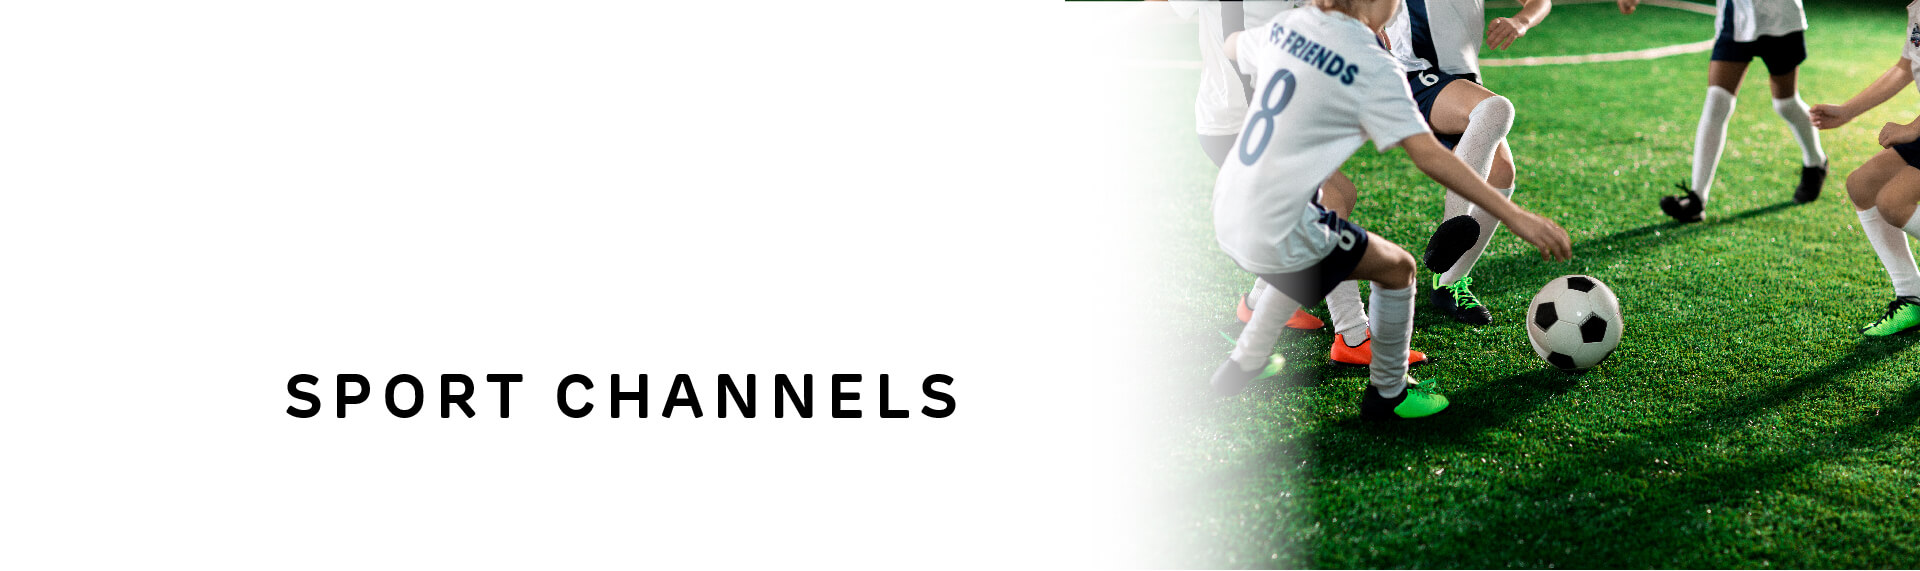 Header image with “Sport Channels” in capital letters; with a photo of children playing soccer on an artificial grass pitch. 